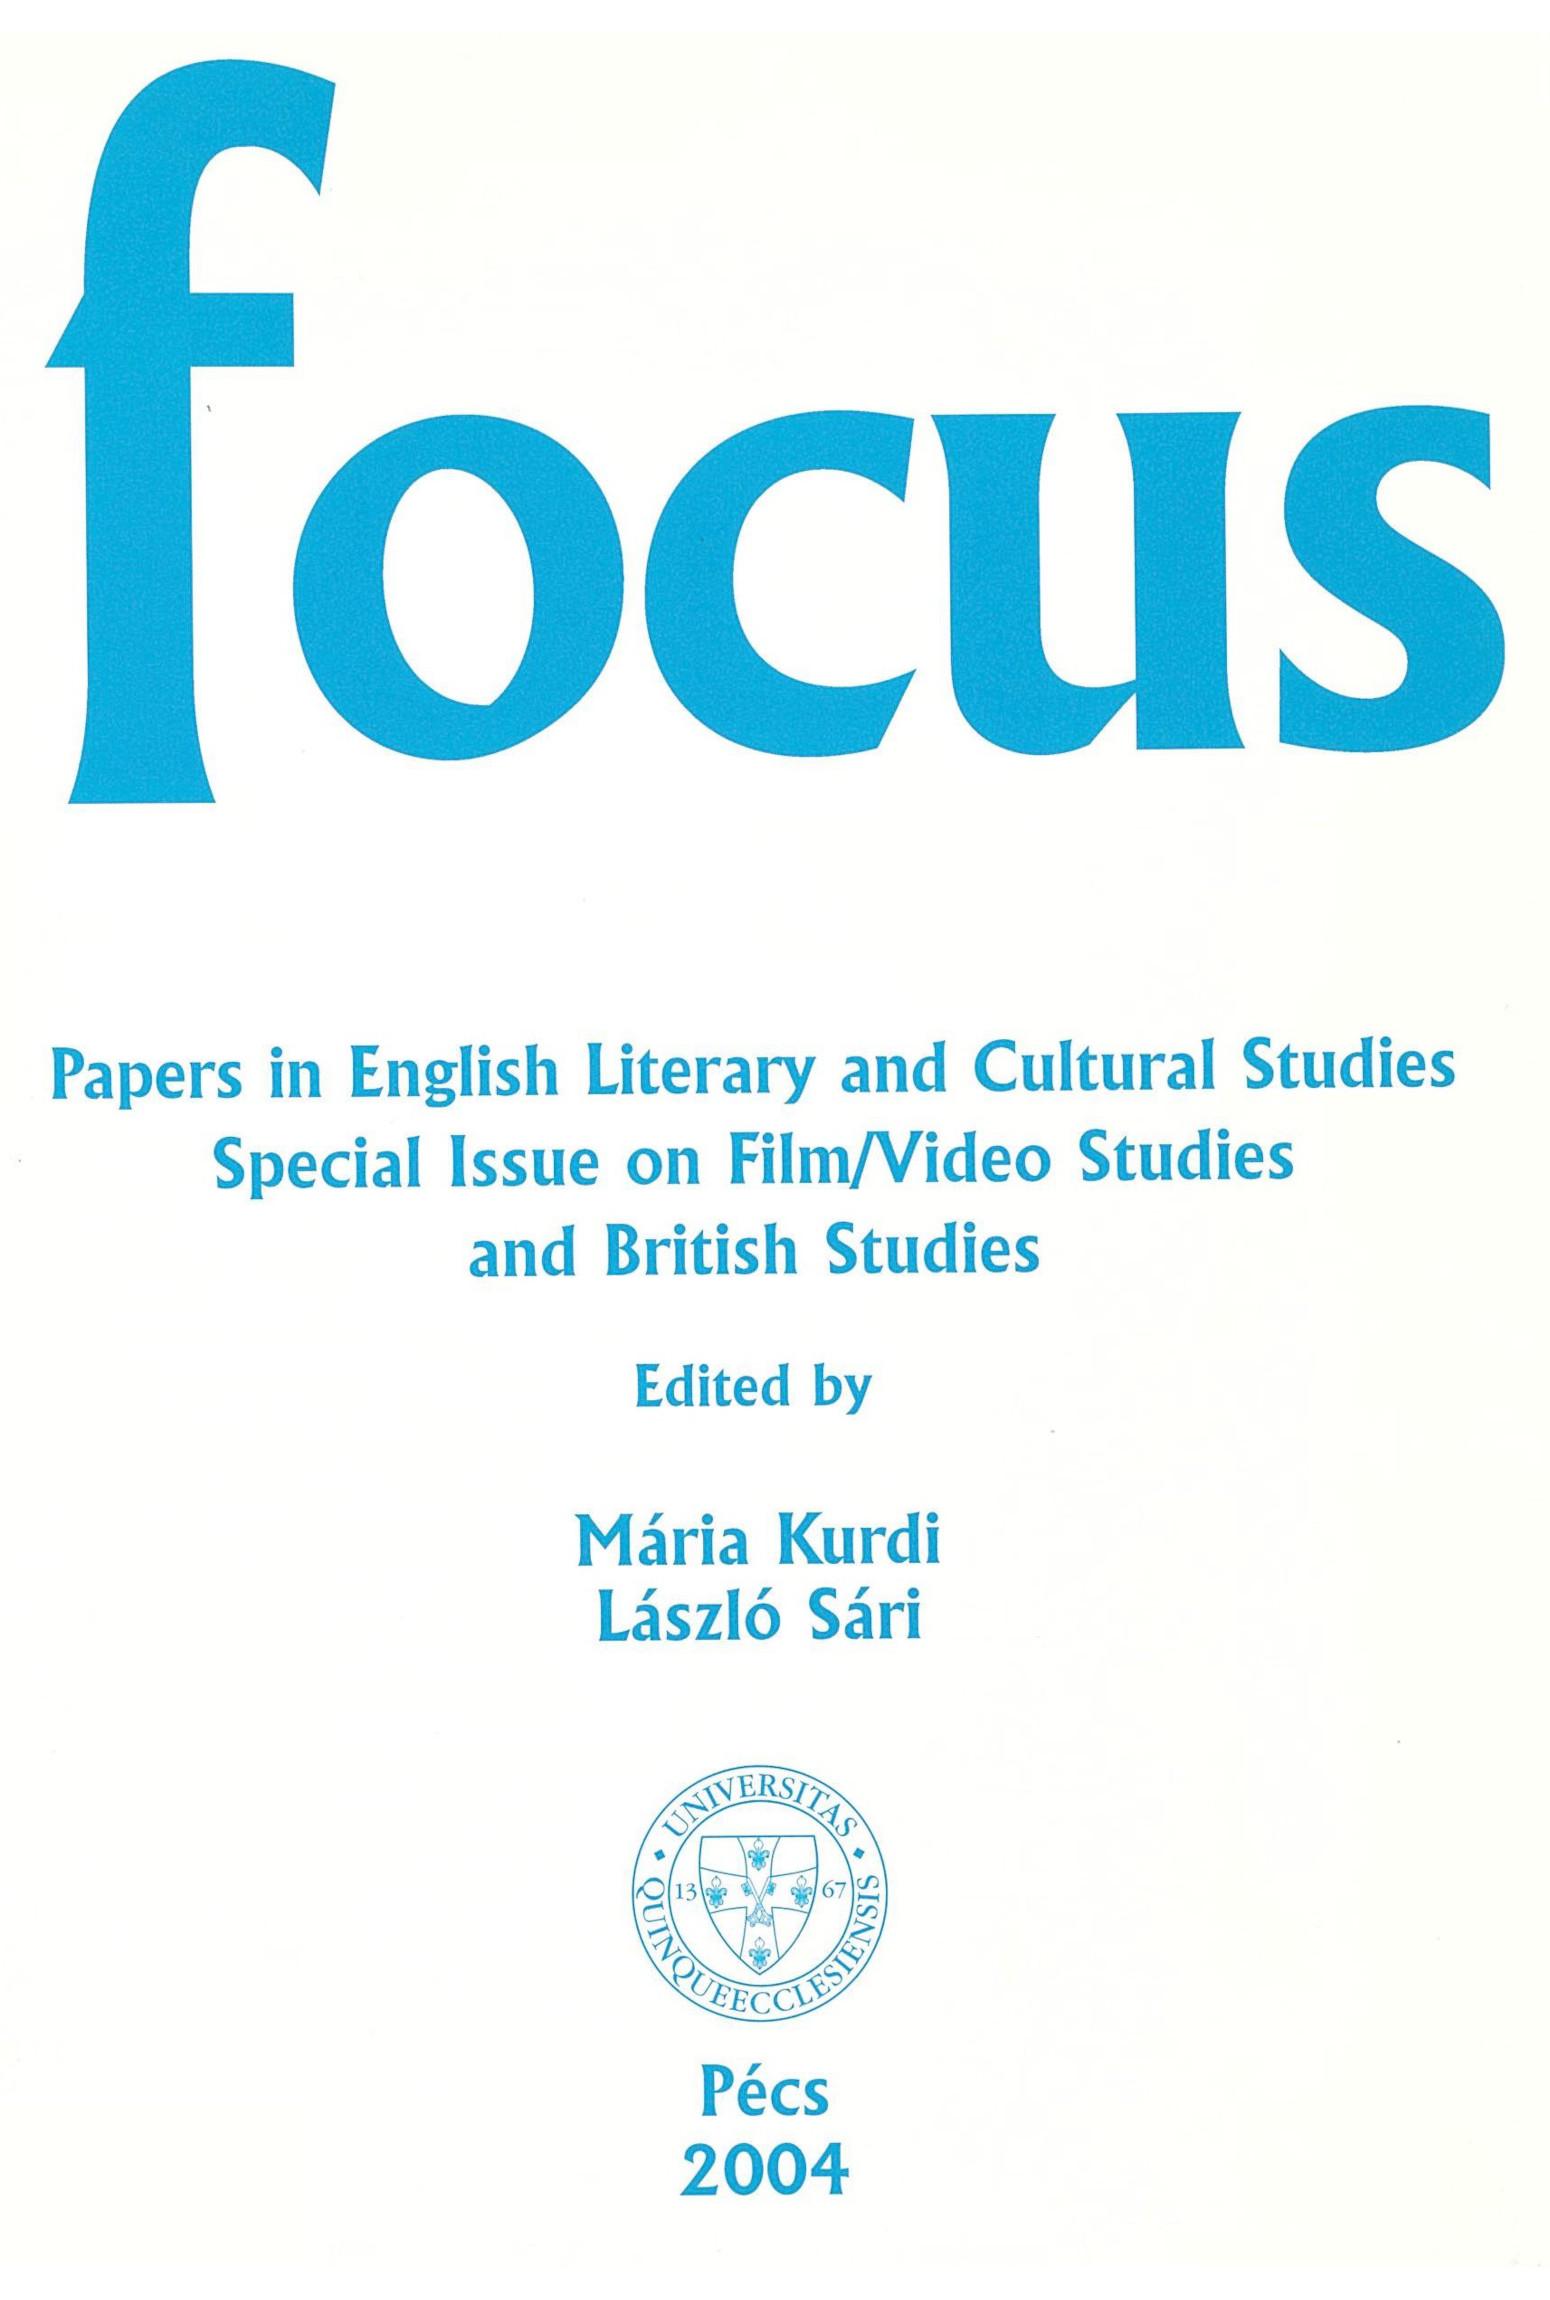 					View Vol. 4 No. 1 (2004): Papers in English Literary and Cultural Studies Special Issue on Film/Video Studies and British Studies
				